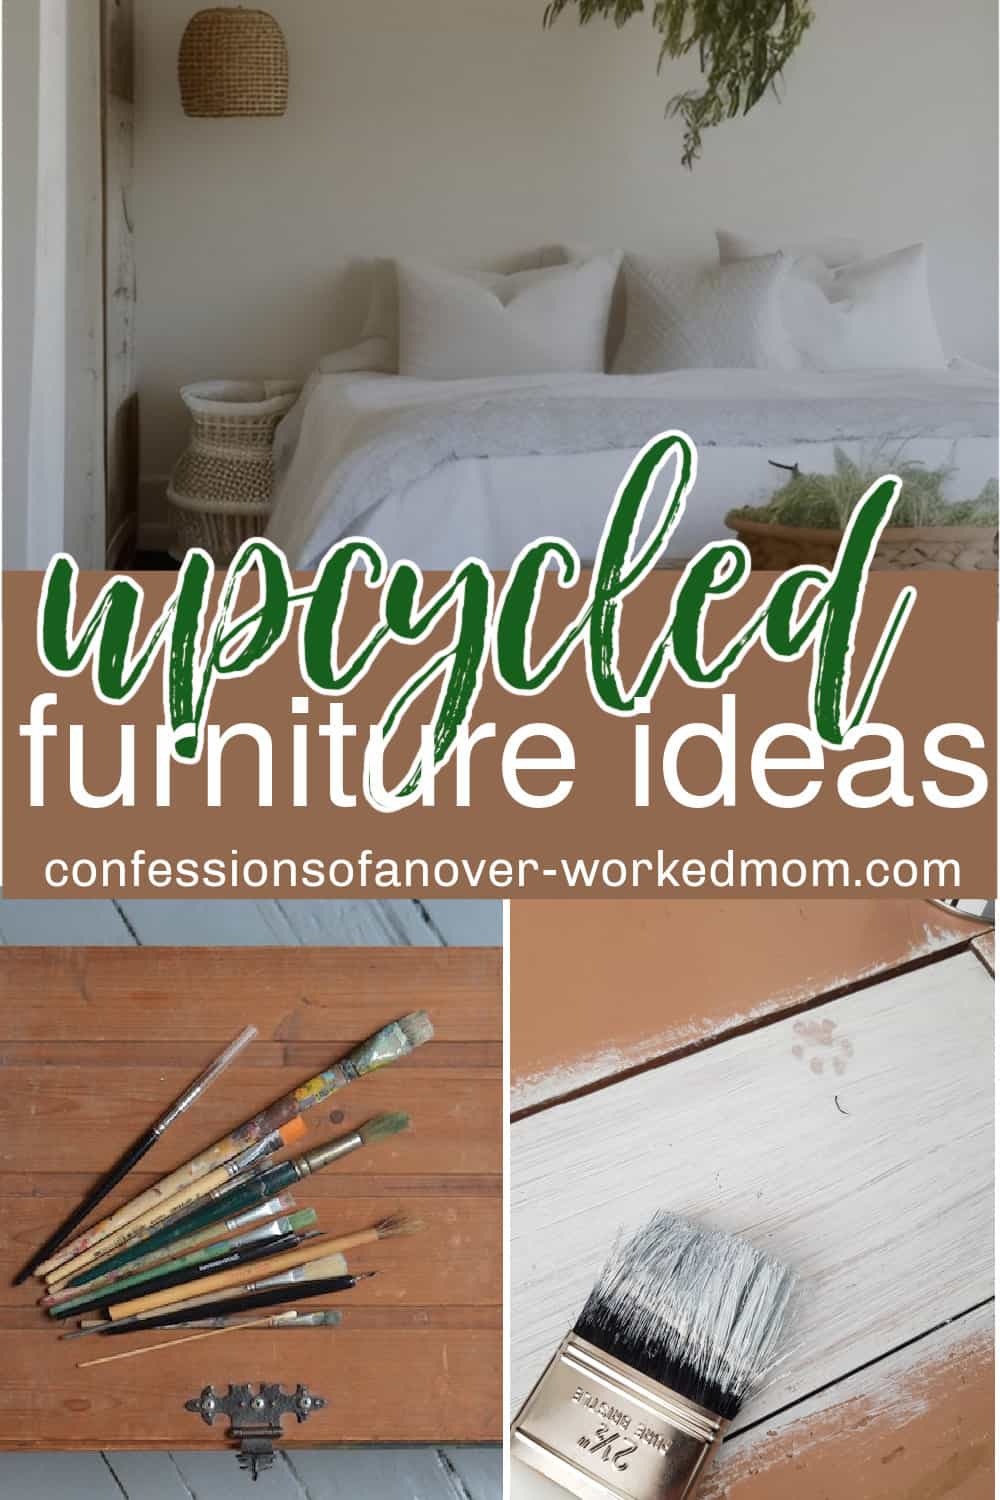 I love upcycling. I am all about keeping furniture and other items out of the landfill by finding other uses for them. Check out these projects.